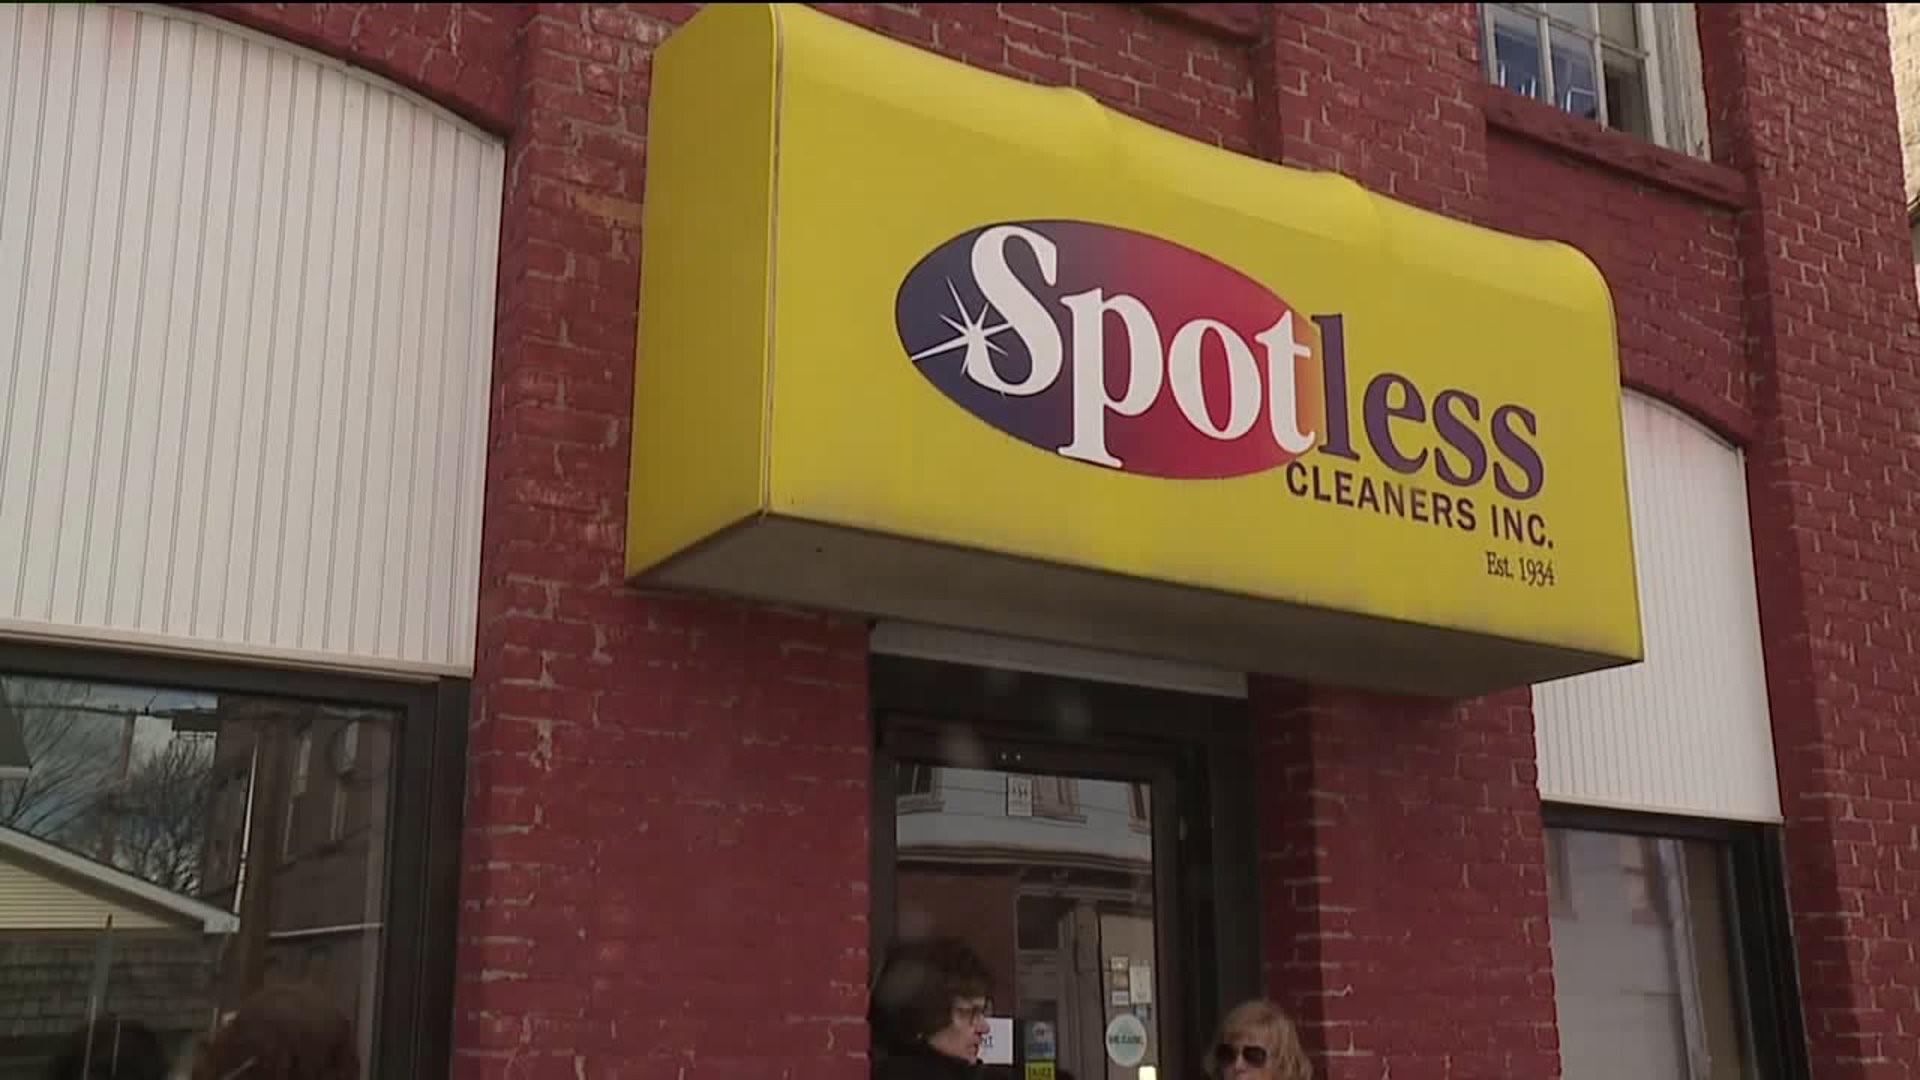 More Headaches for Customers of Spotless Cleaners